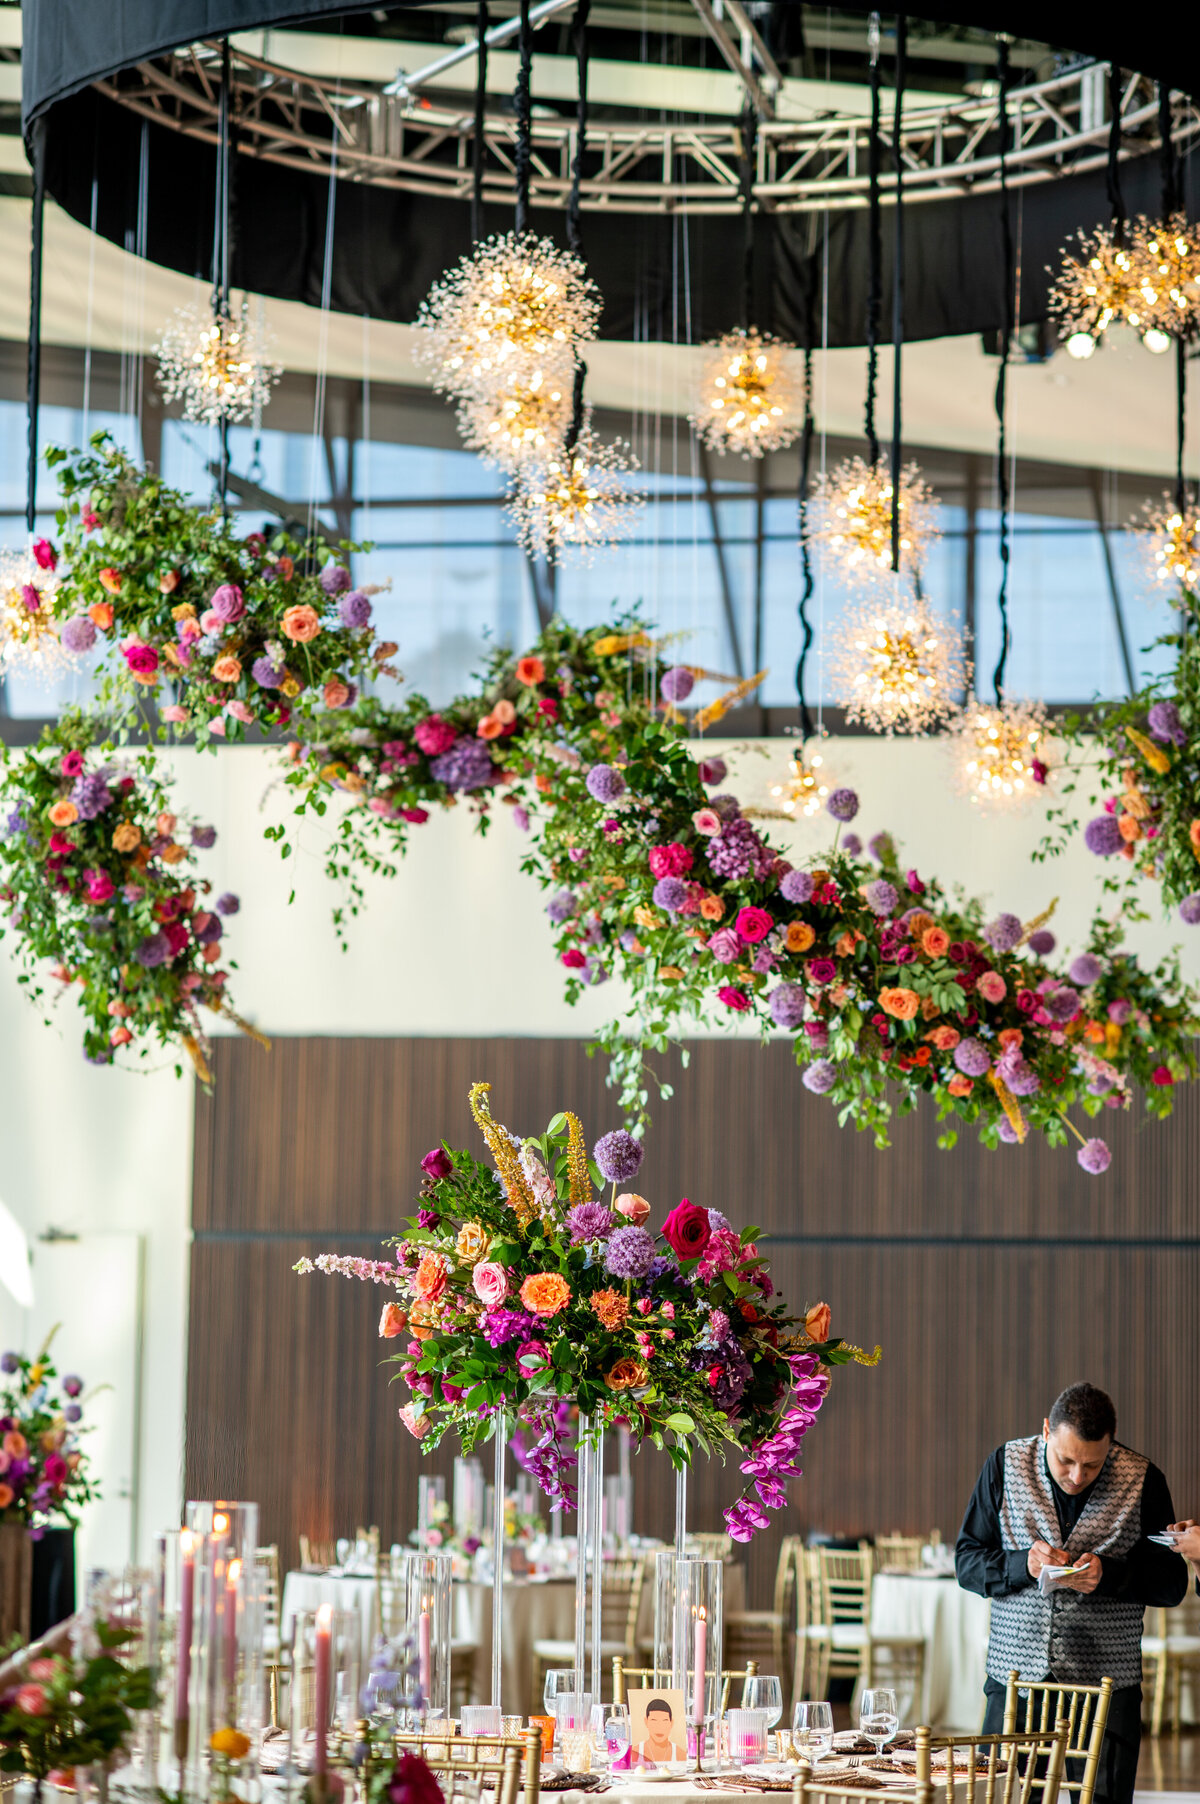 Joyful hanging floral cloud chandelier installation composed of petal heavy roses, allium, eremurus, delphinium, snapdragons, spray roses and garden-inspired greenery in hues of pink, fuchsia, lavender, orange, and golden yellow lighting up the dance floor of this summer wedding. Design by Rosemary and Finch in Nashville, TN.